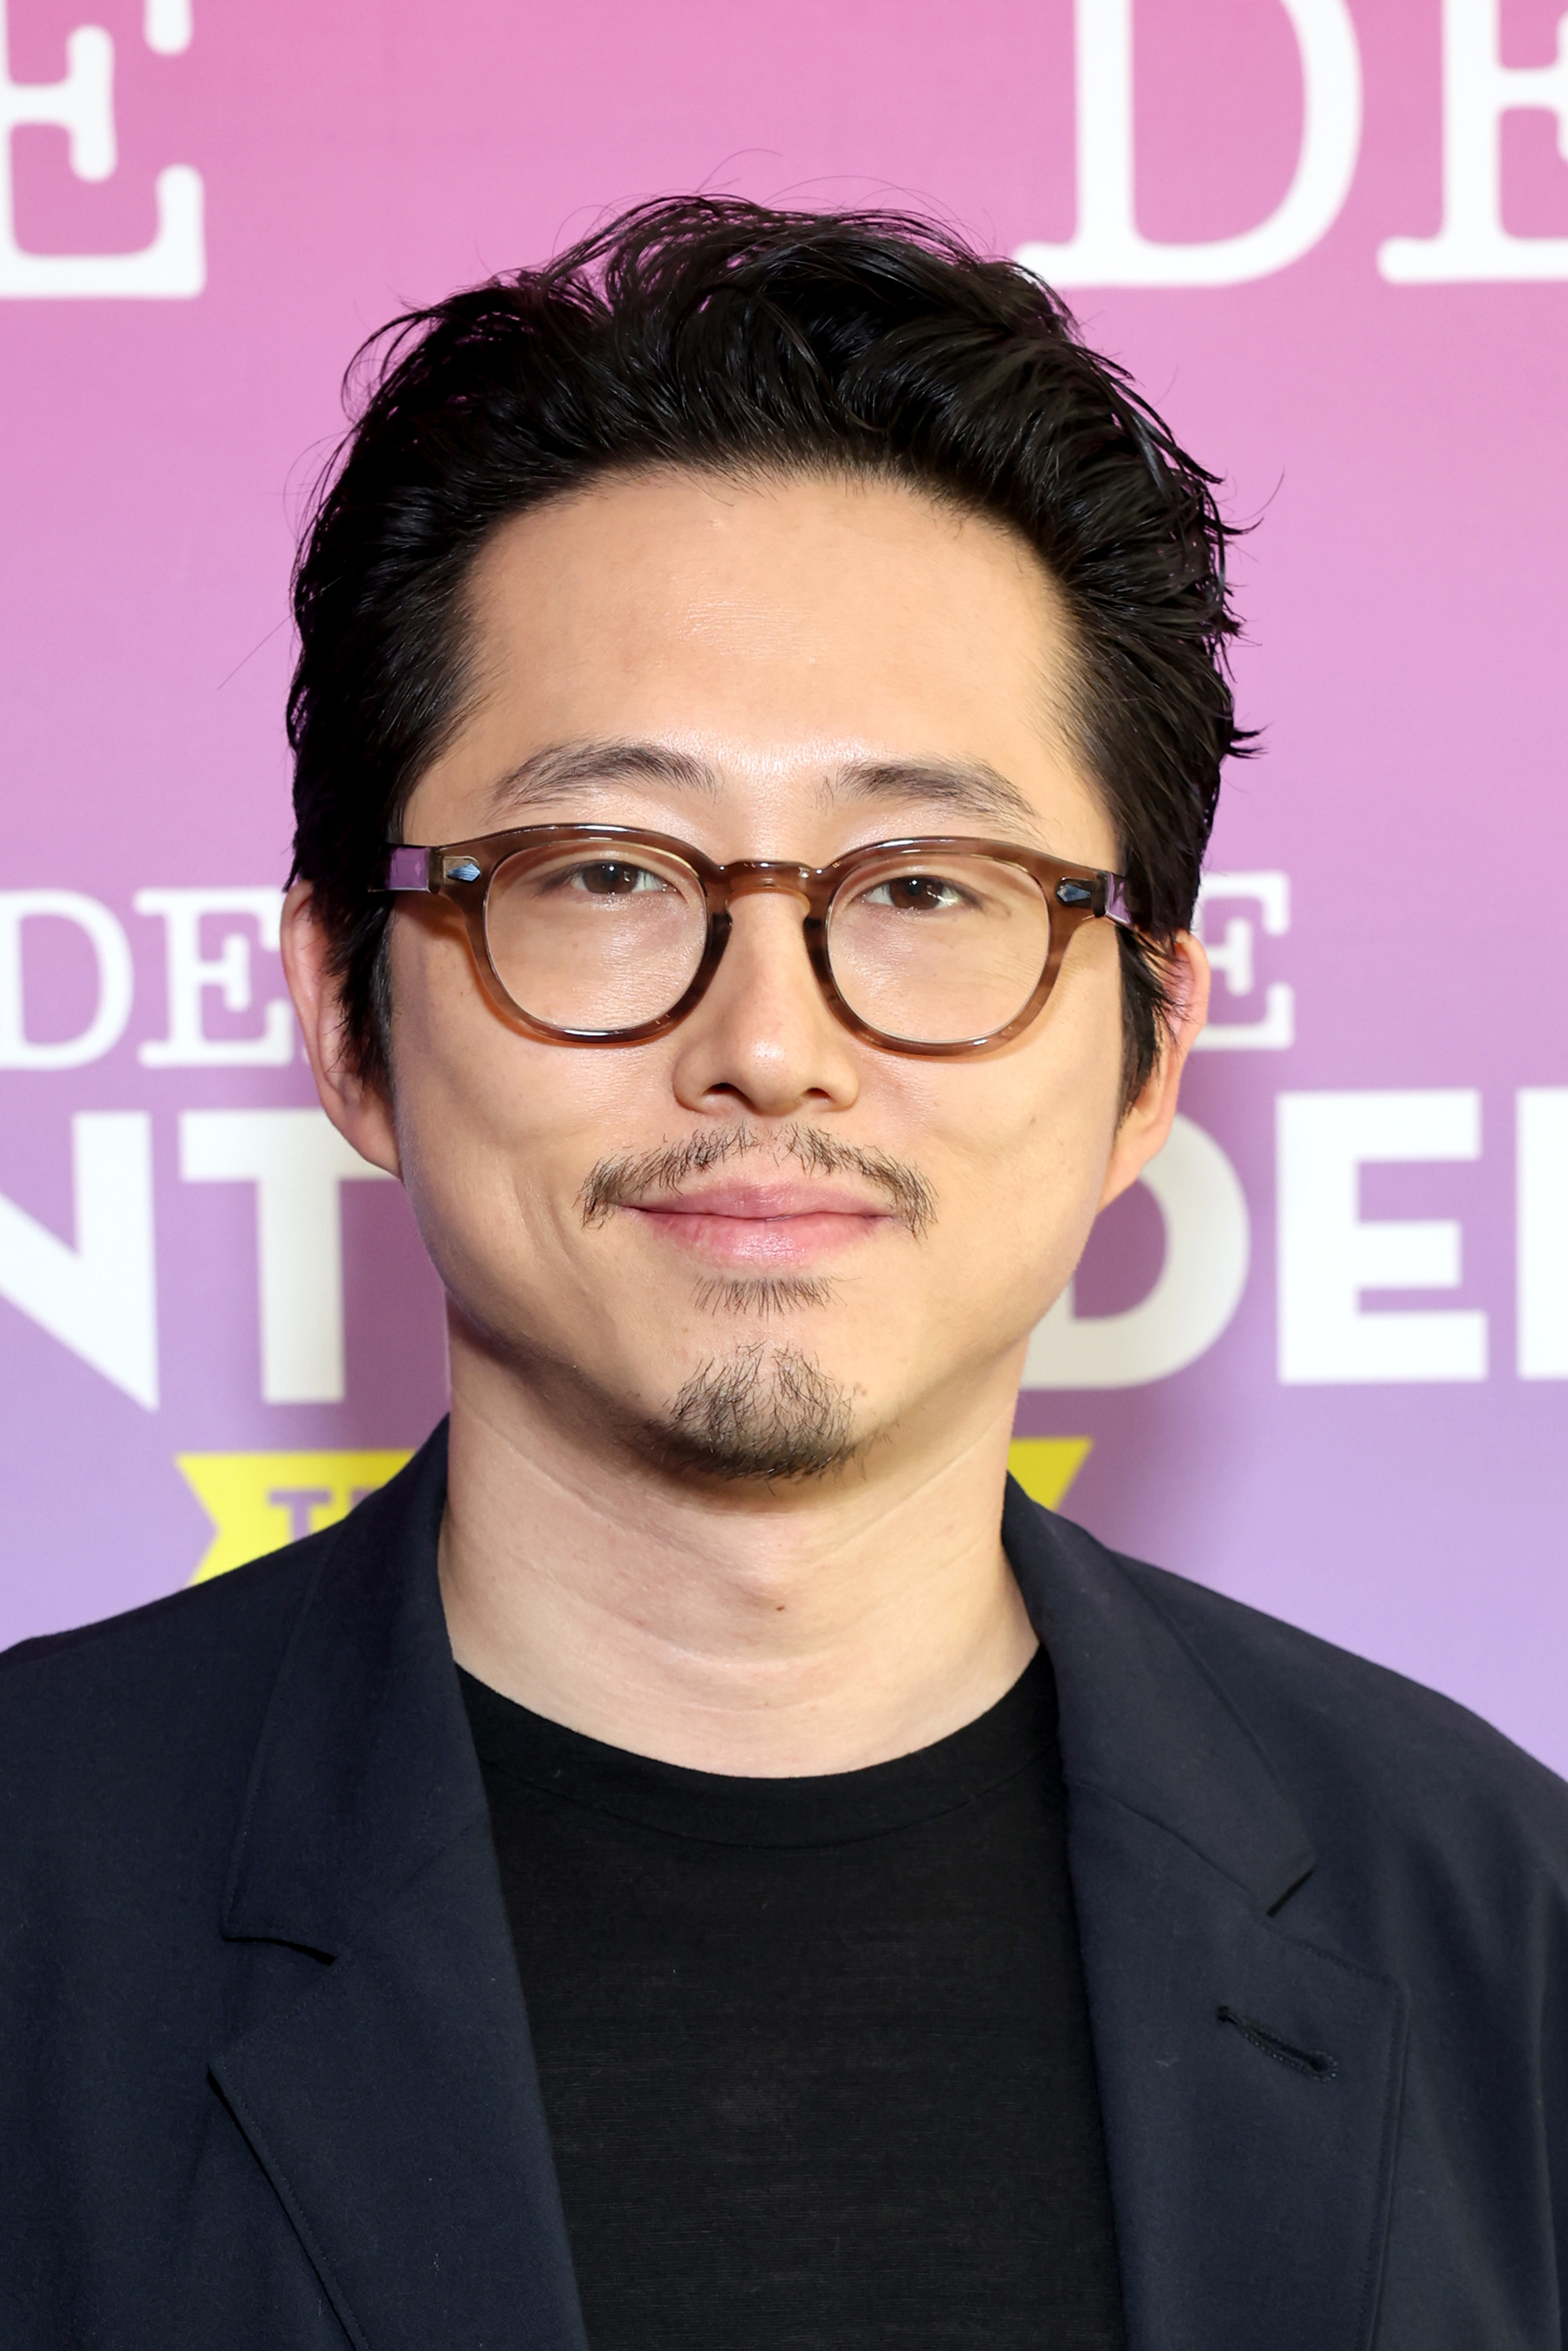 Steven Yeun attends Deadline Contenders Television at Directors Guild Of America